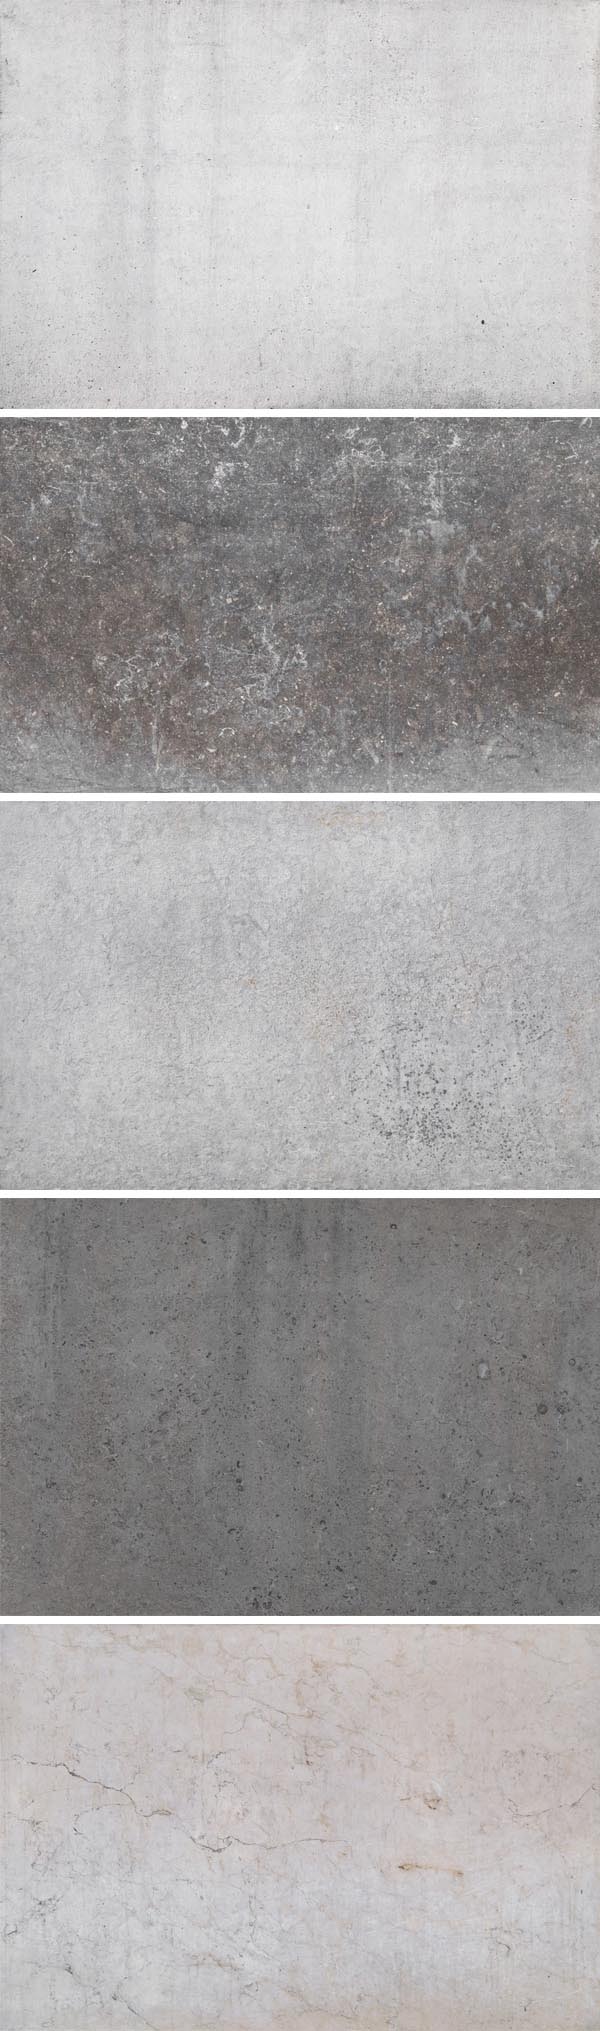 5 Free Stone Wall Texture Backgrounds